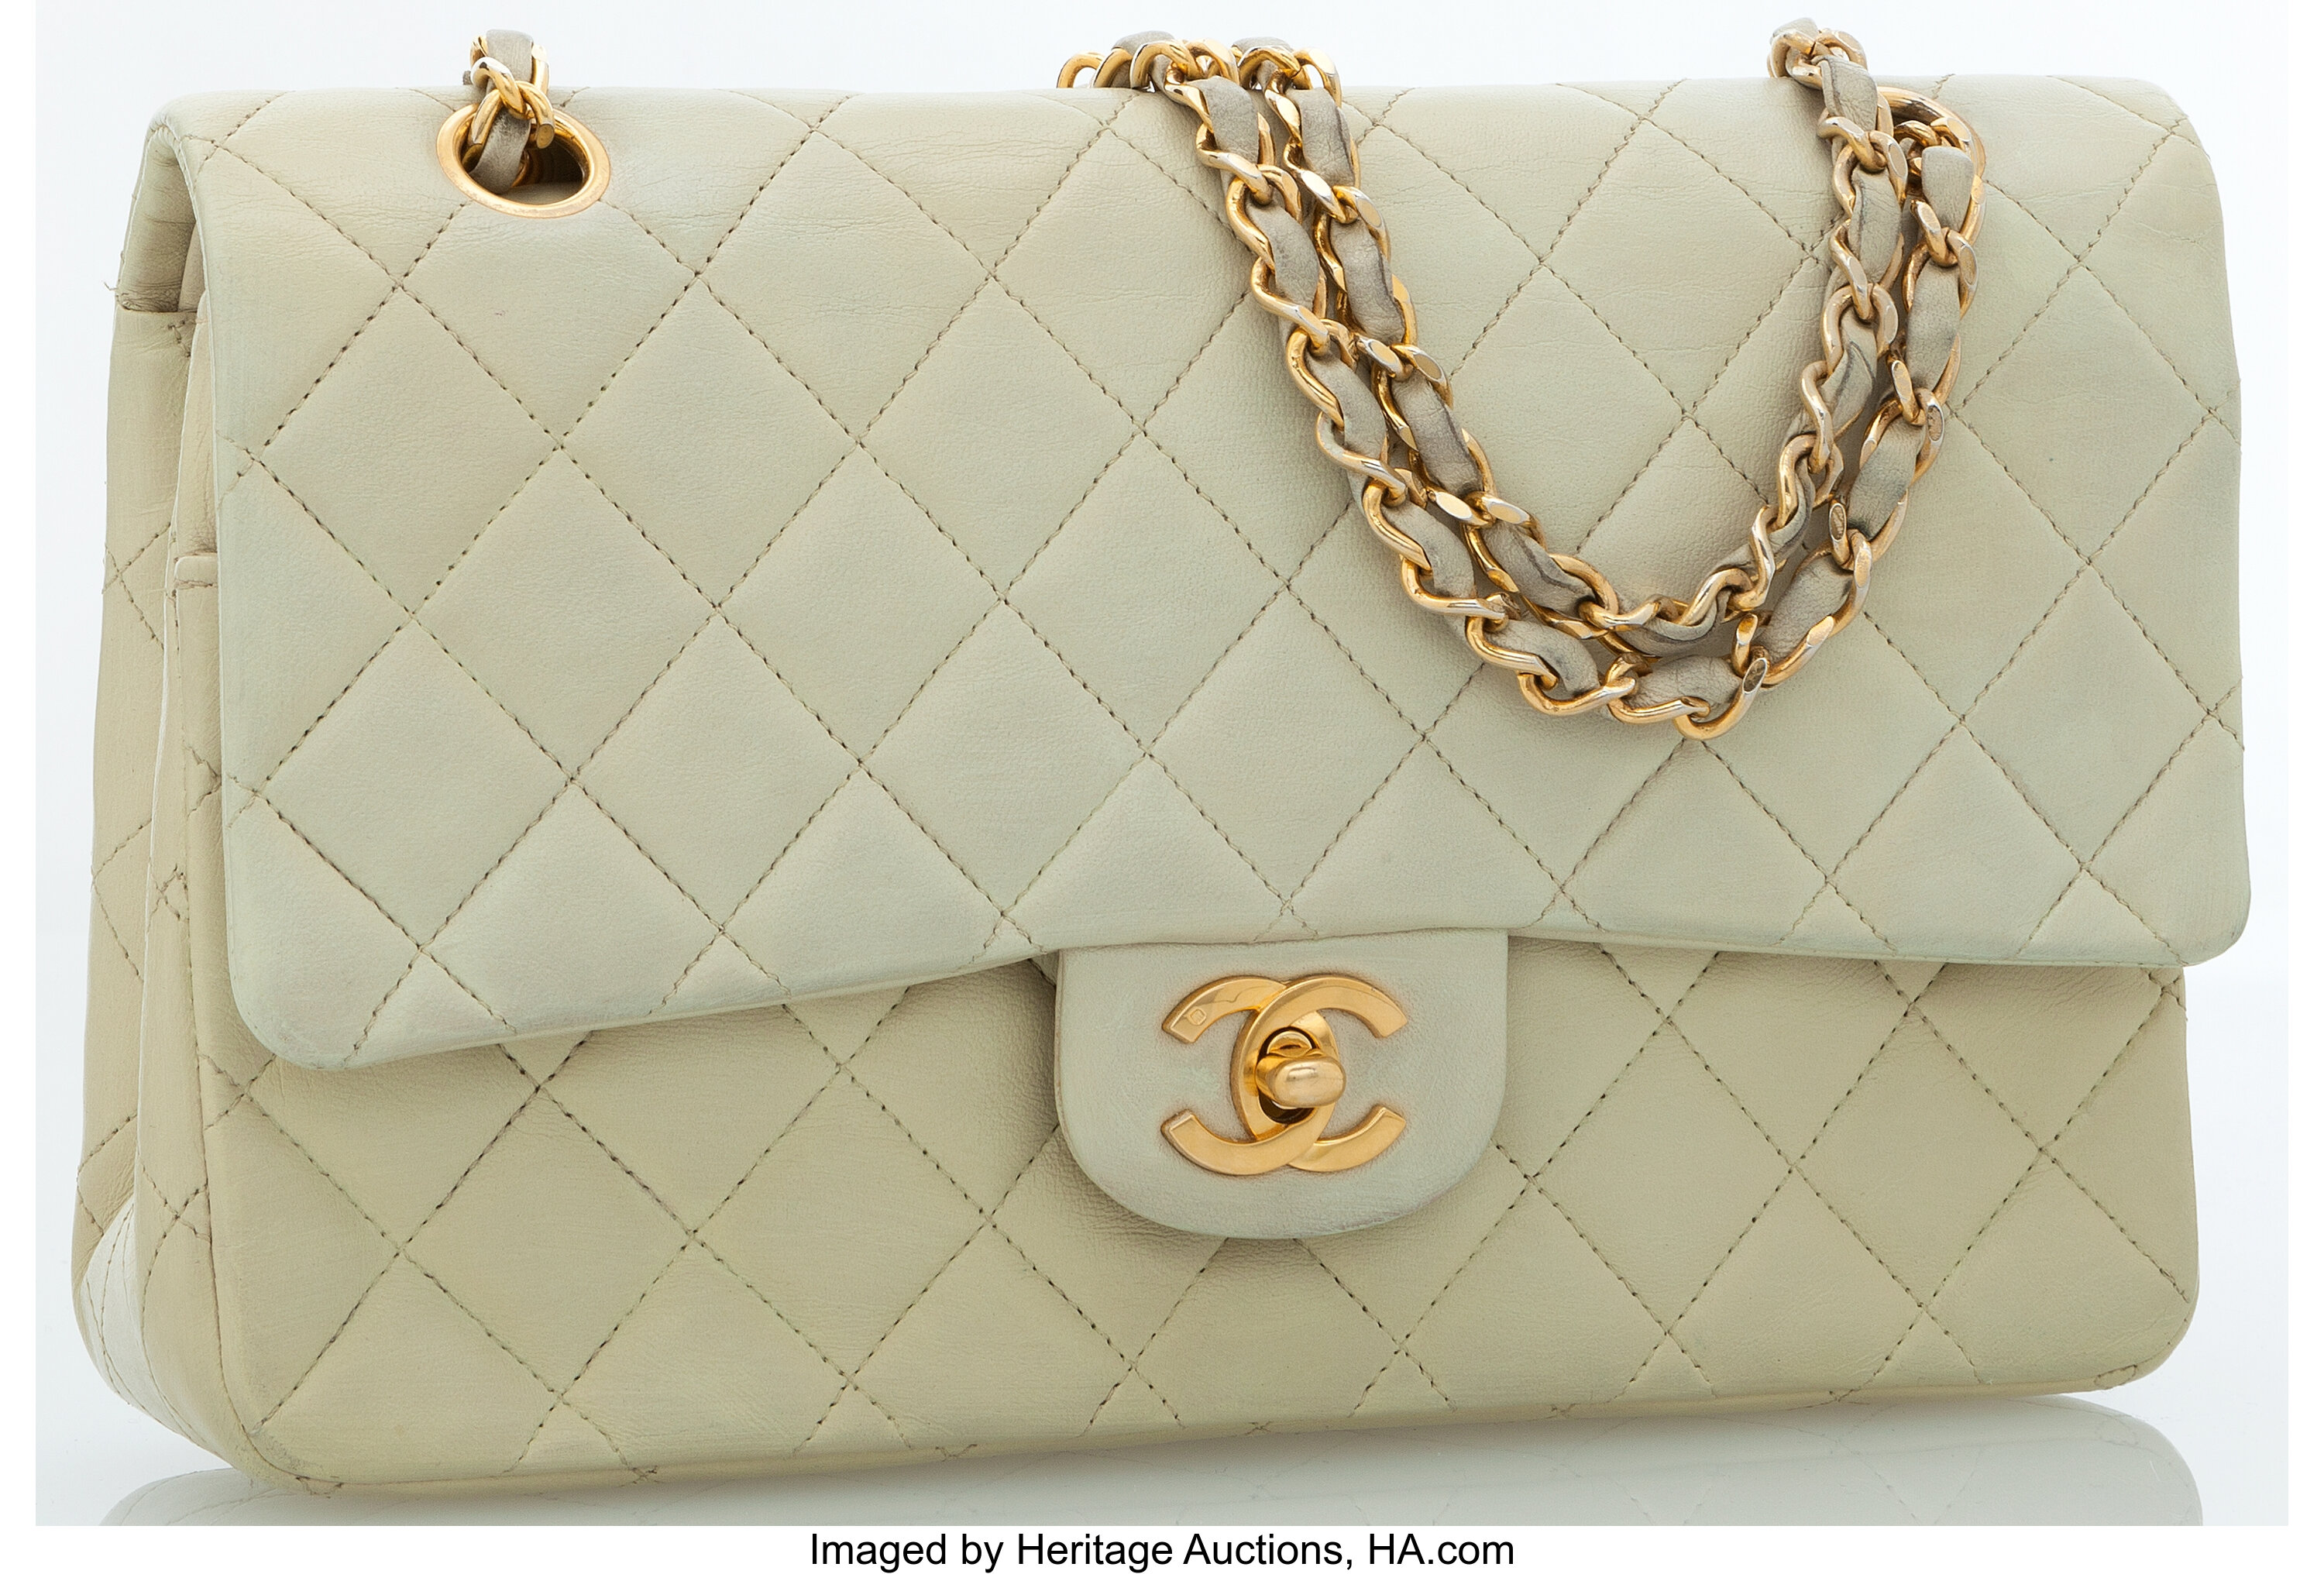 Chanel Beige Lambskin Quilted Leather Classic Medium Double Flap